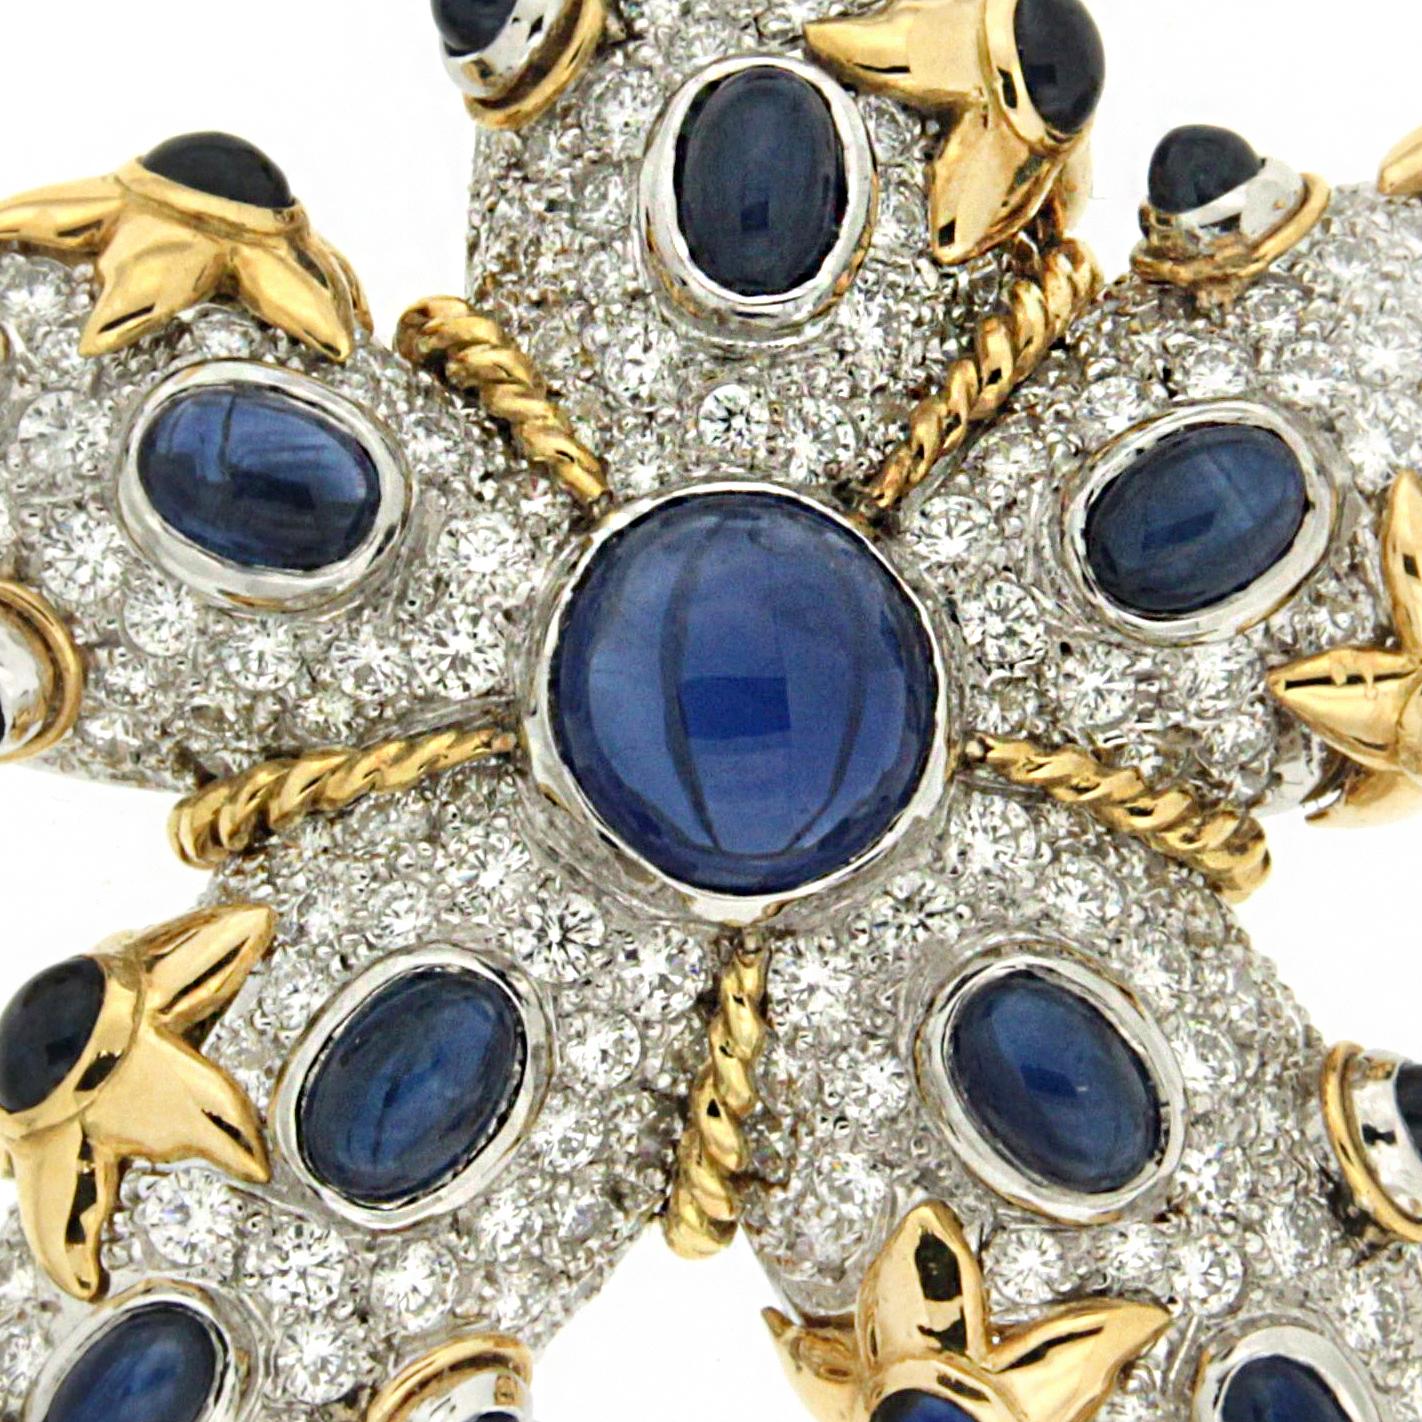 Jewels of diamonds and sapphires recreate this saltwater creature. An 18k yellow gold base is furnished with pavé set diamonds. Bezel set in 18k white gold, sapphire cabochons decorate the arms. Gold braids provide further definition of the arms and